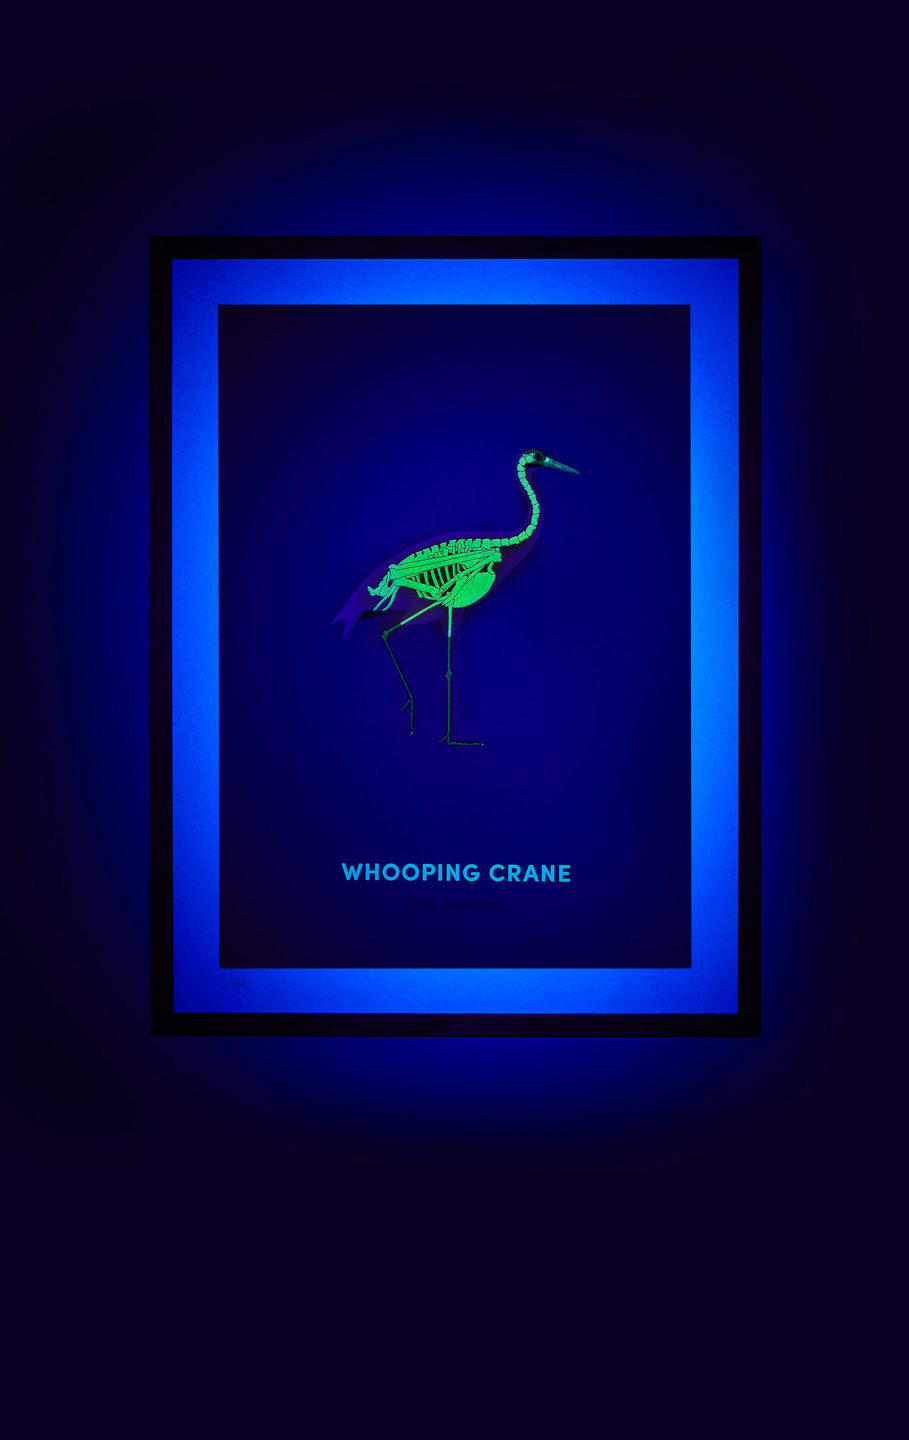 Whooping Crane screen print under UV light - shown on hover